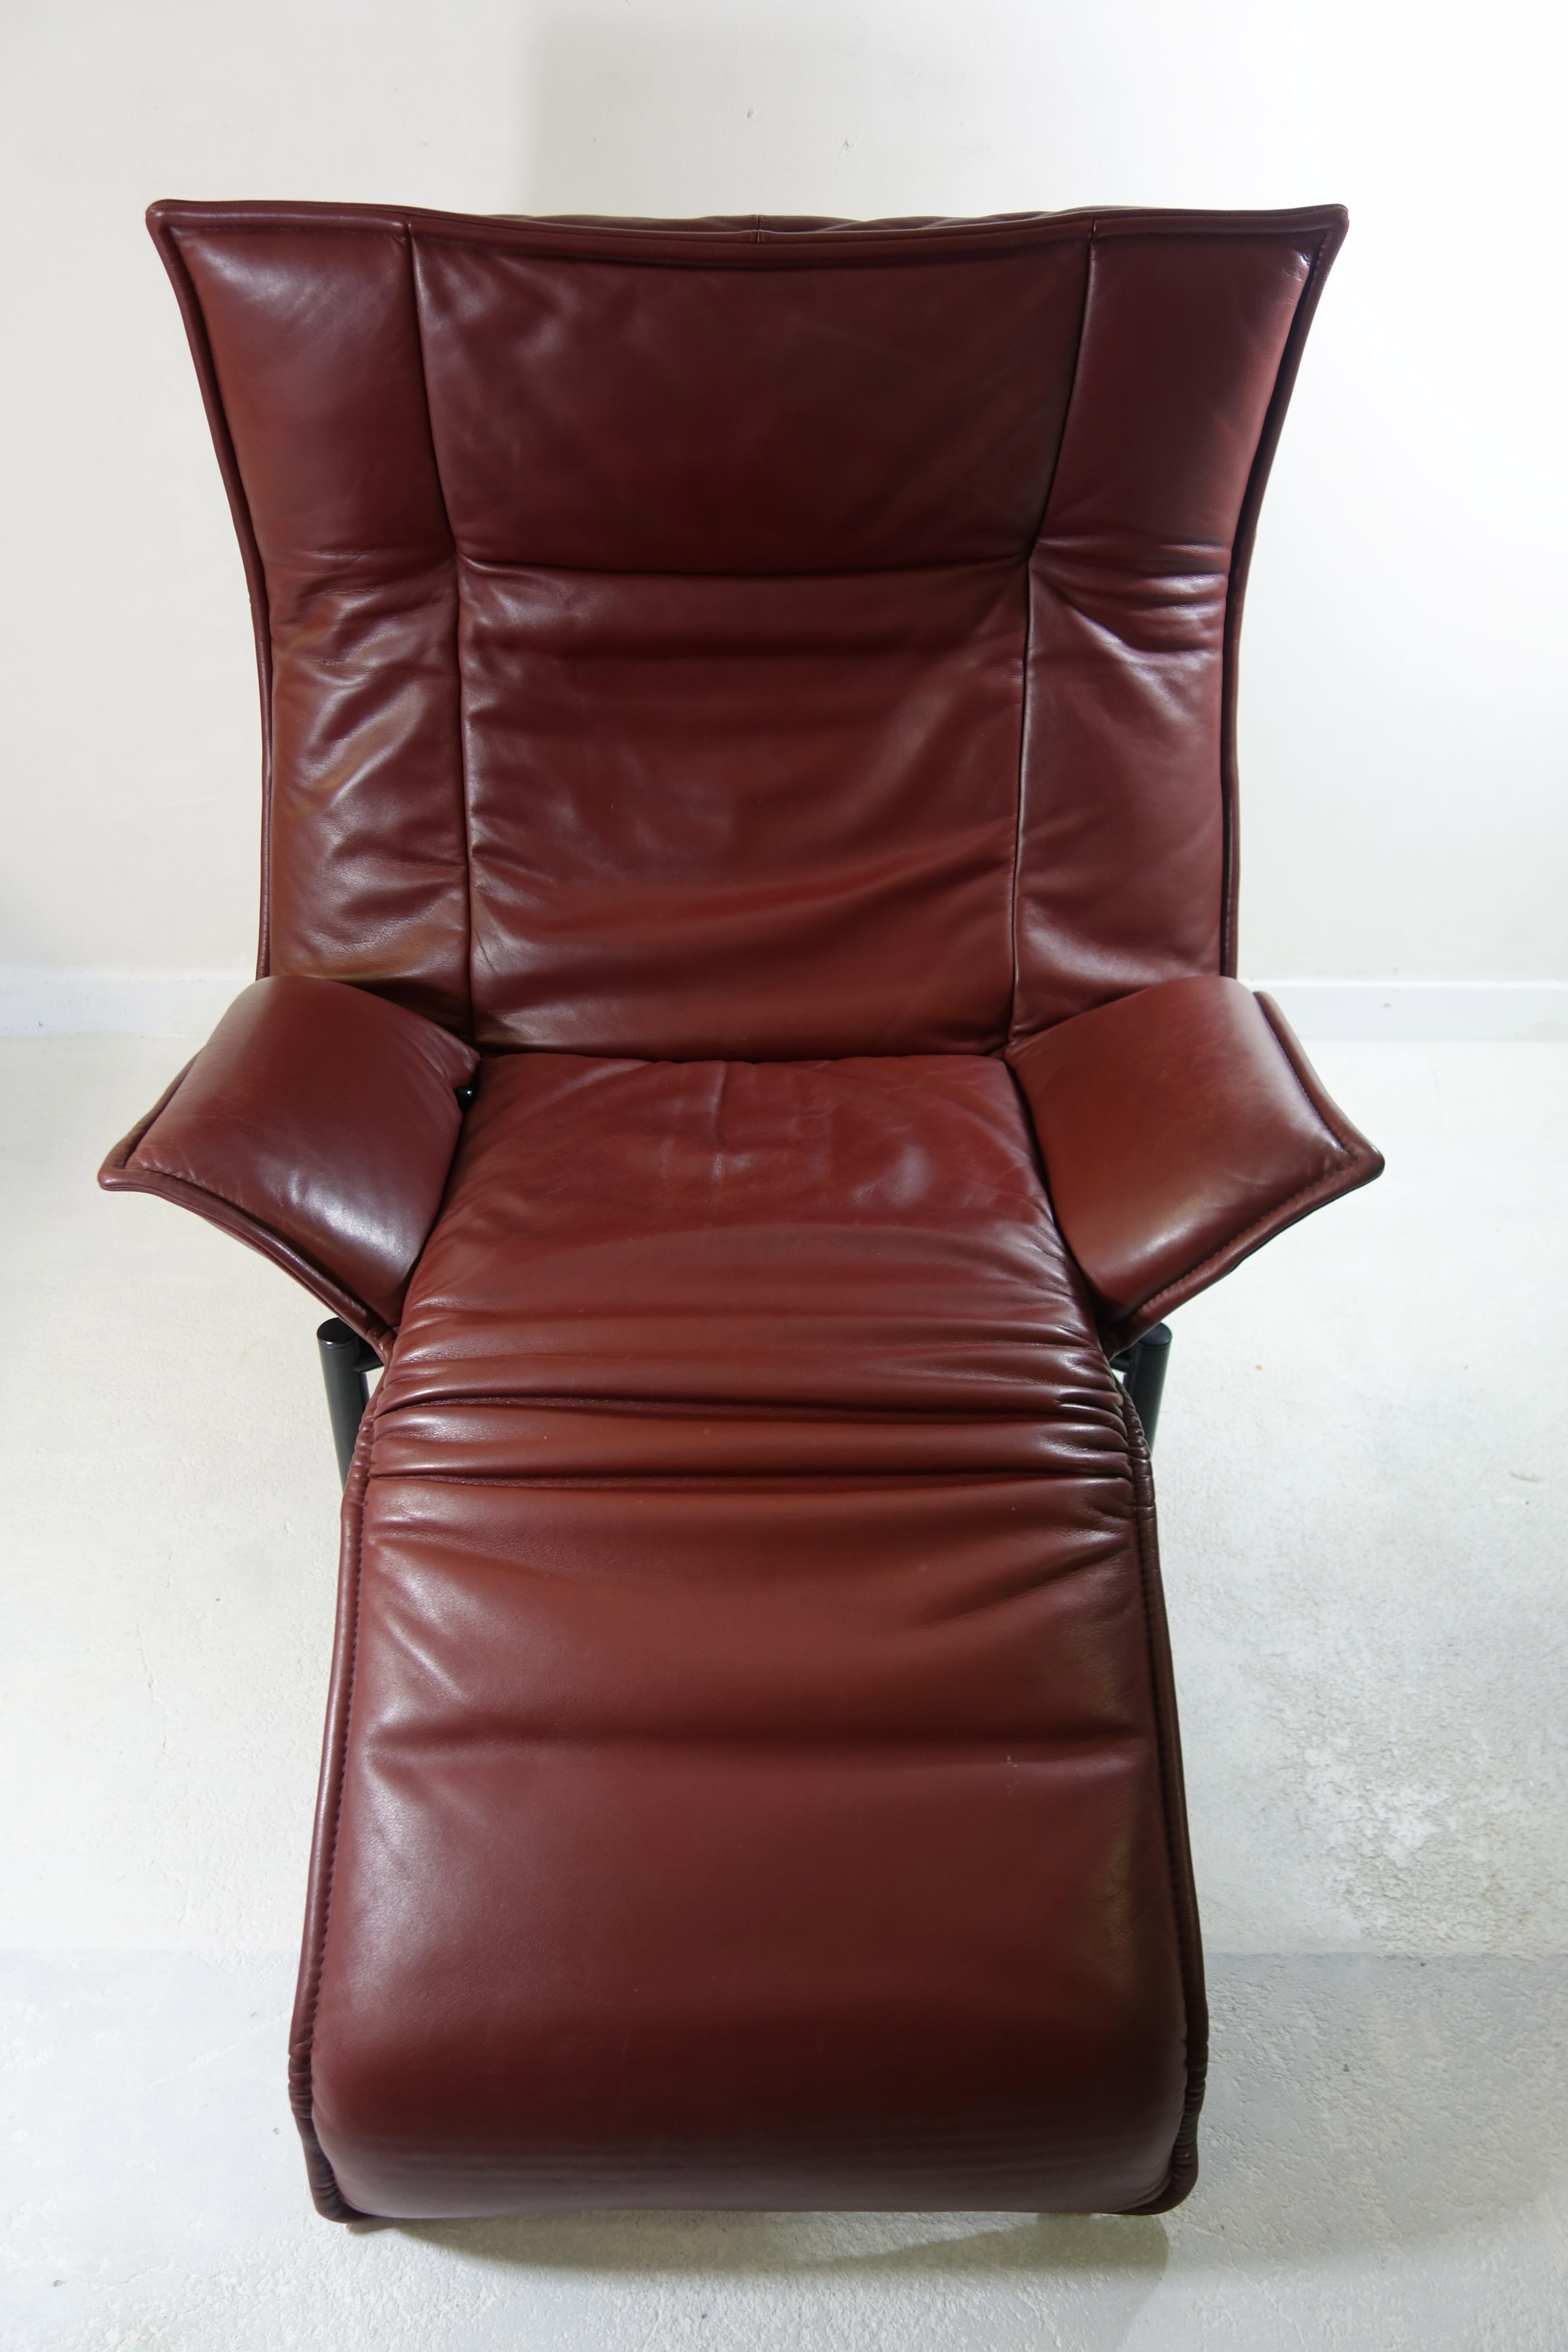 Veranda Lounge Chair by Vico Magistretti for Cassina in Brown Leather Reclining 3